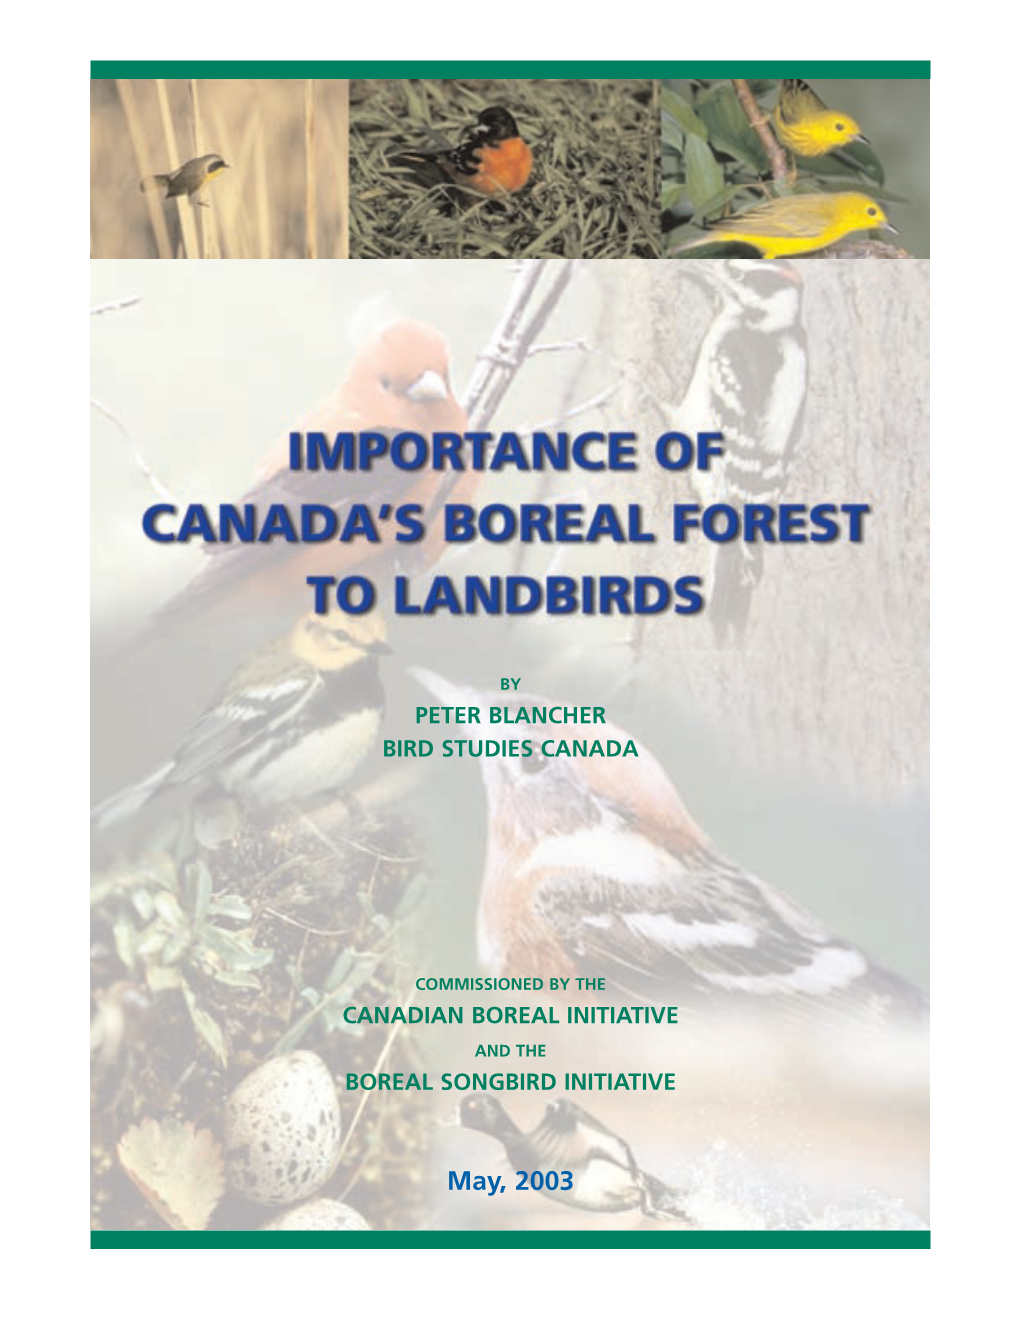 Importance of Canada's Boreal Forest to Landbirds